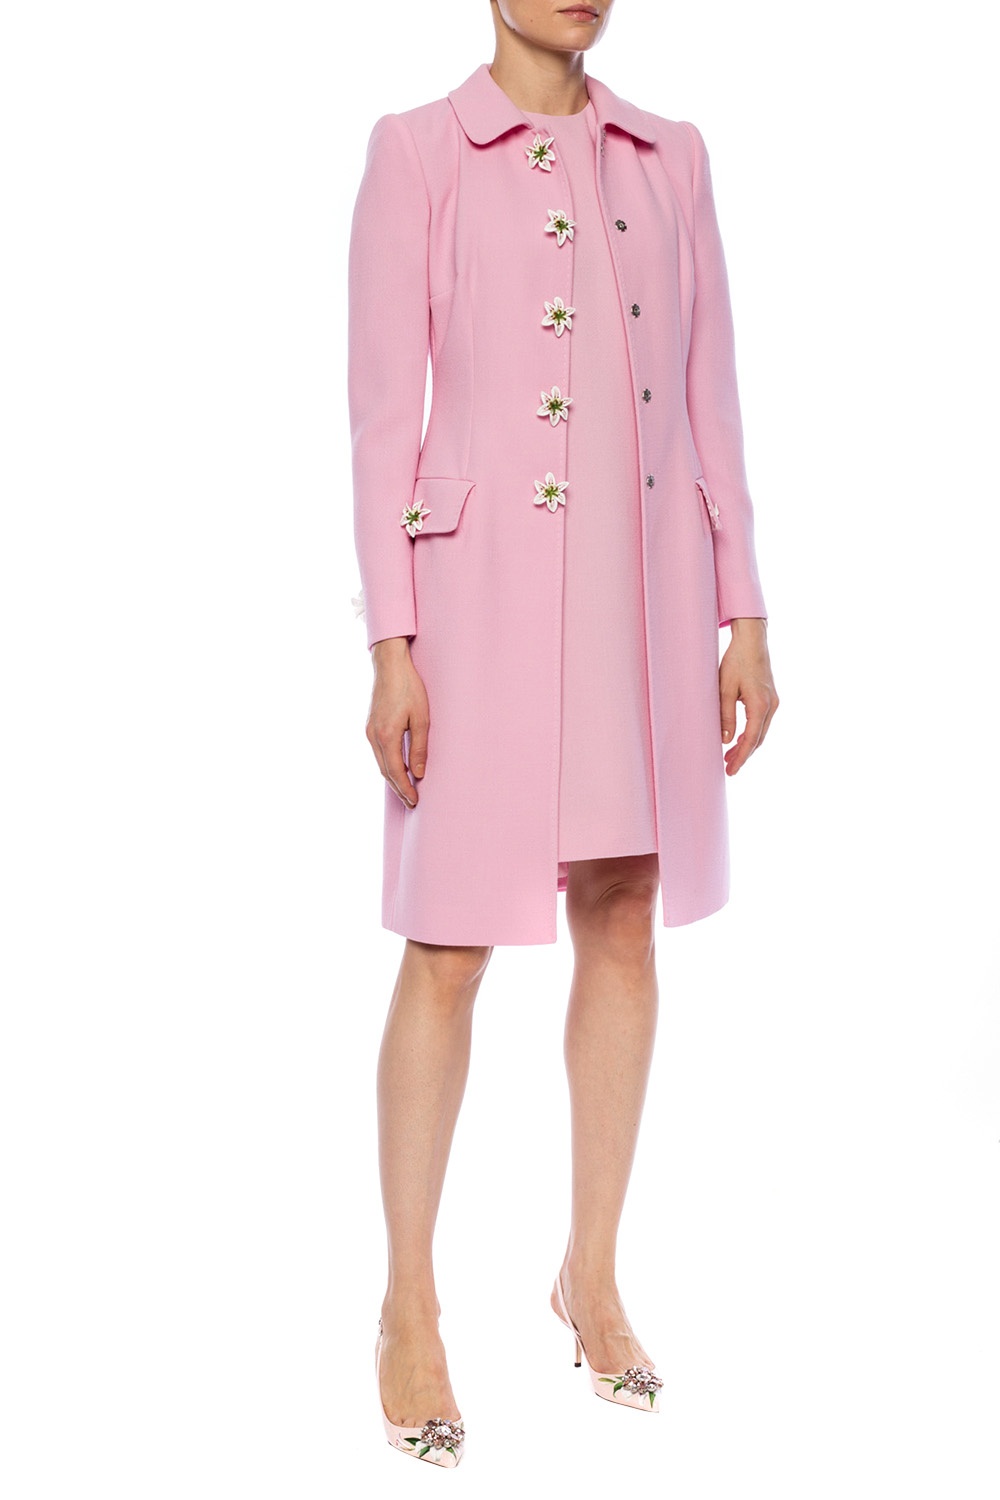 dolce and gabbana pink coat